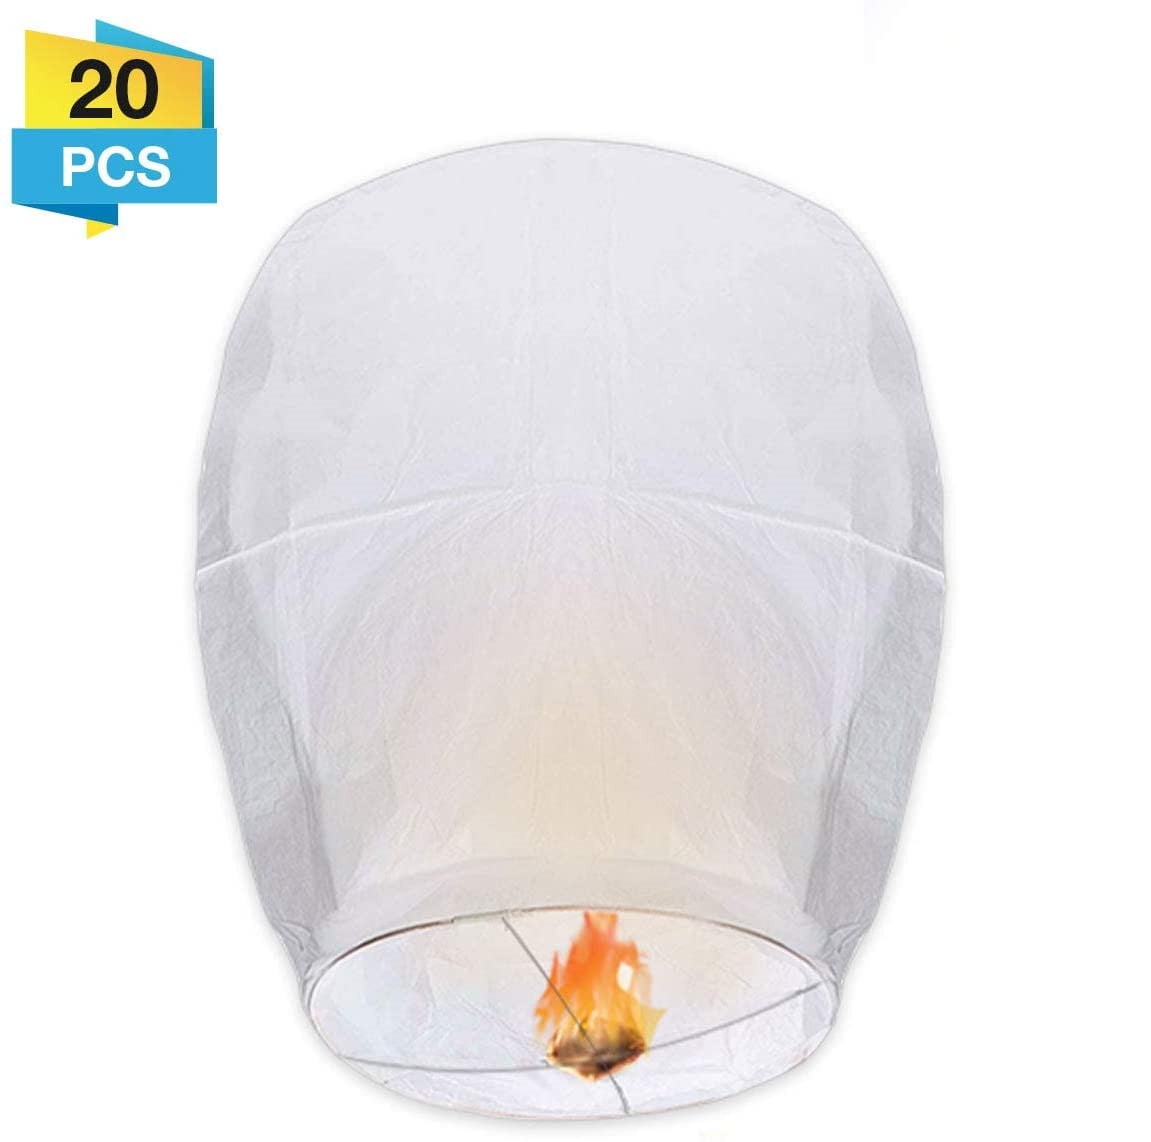 New Year Celebration and More Environmentally Friendly Wishing Lanterns for Wedding 10 Pack Chinese Lanterns Birthday Party Sky Lanterns Release